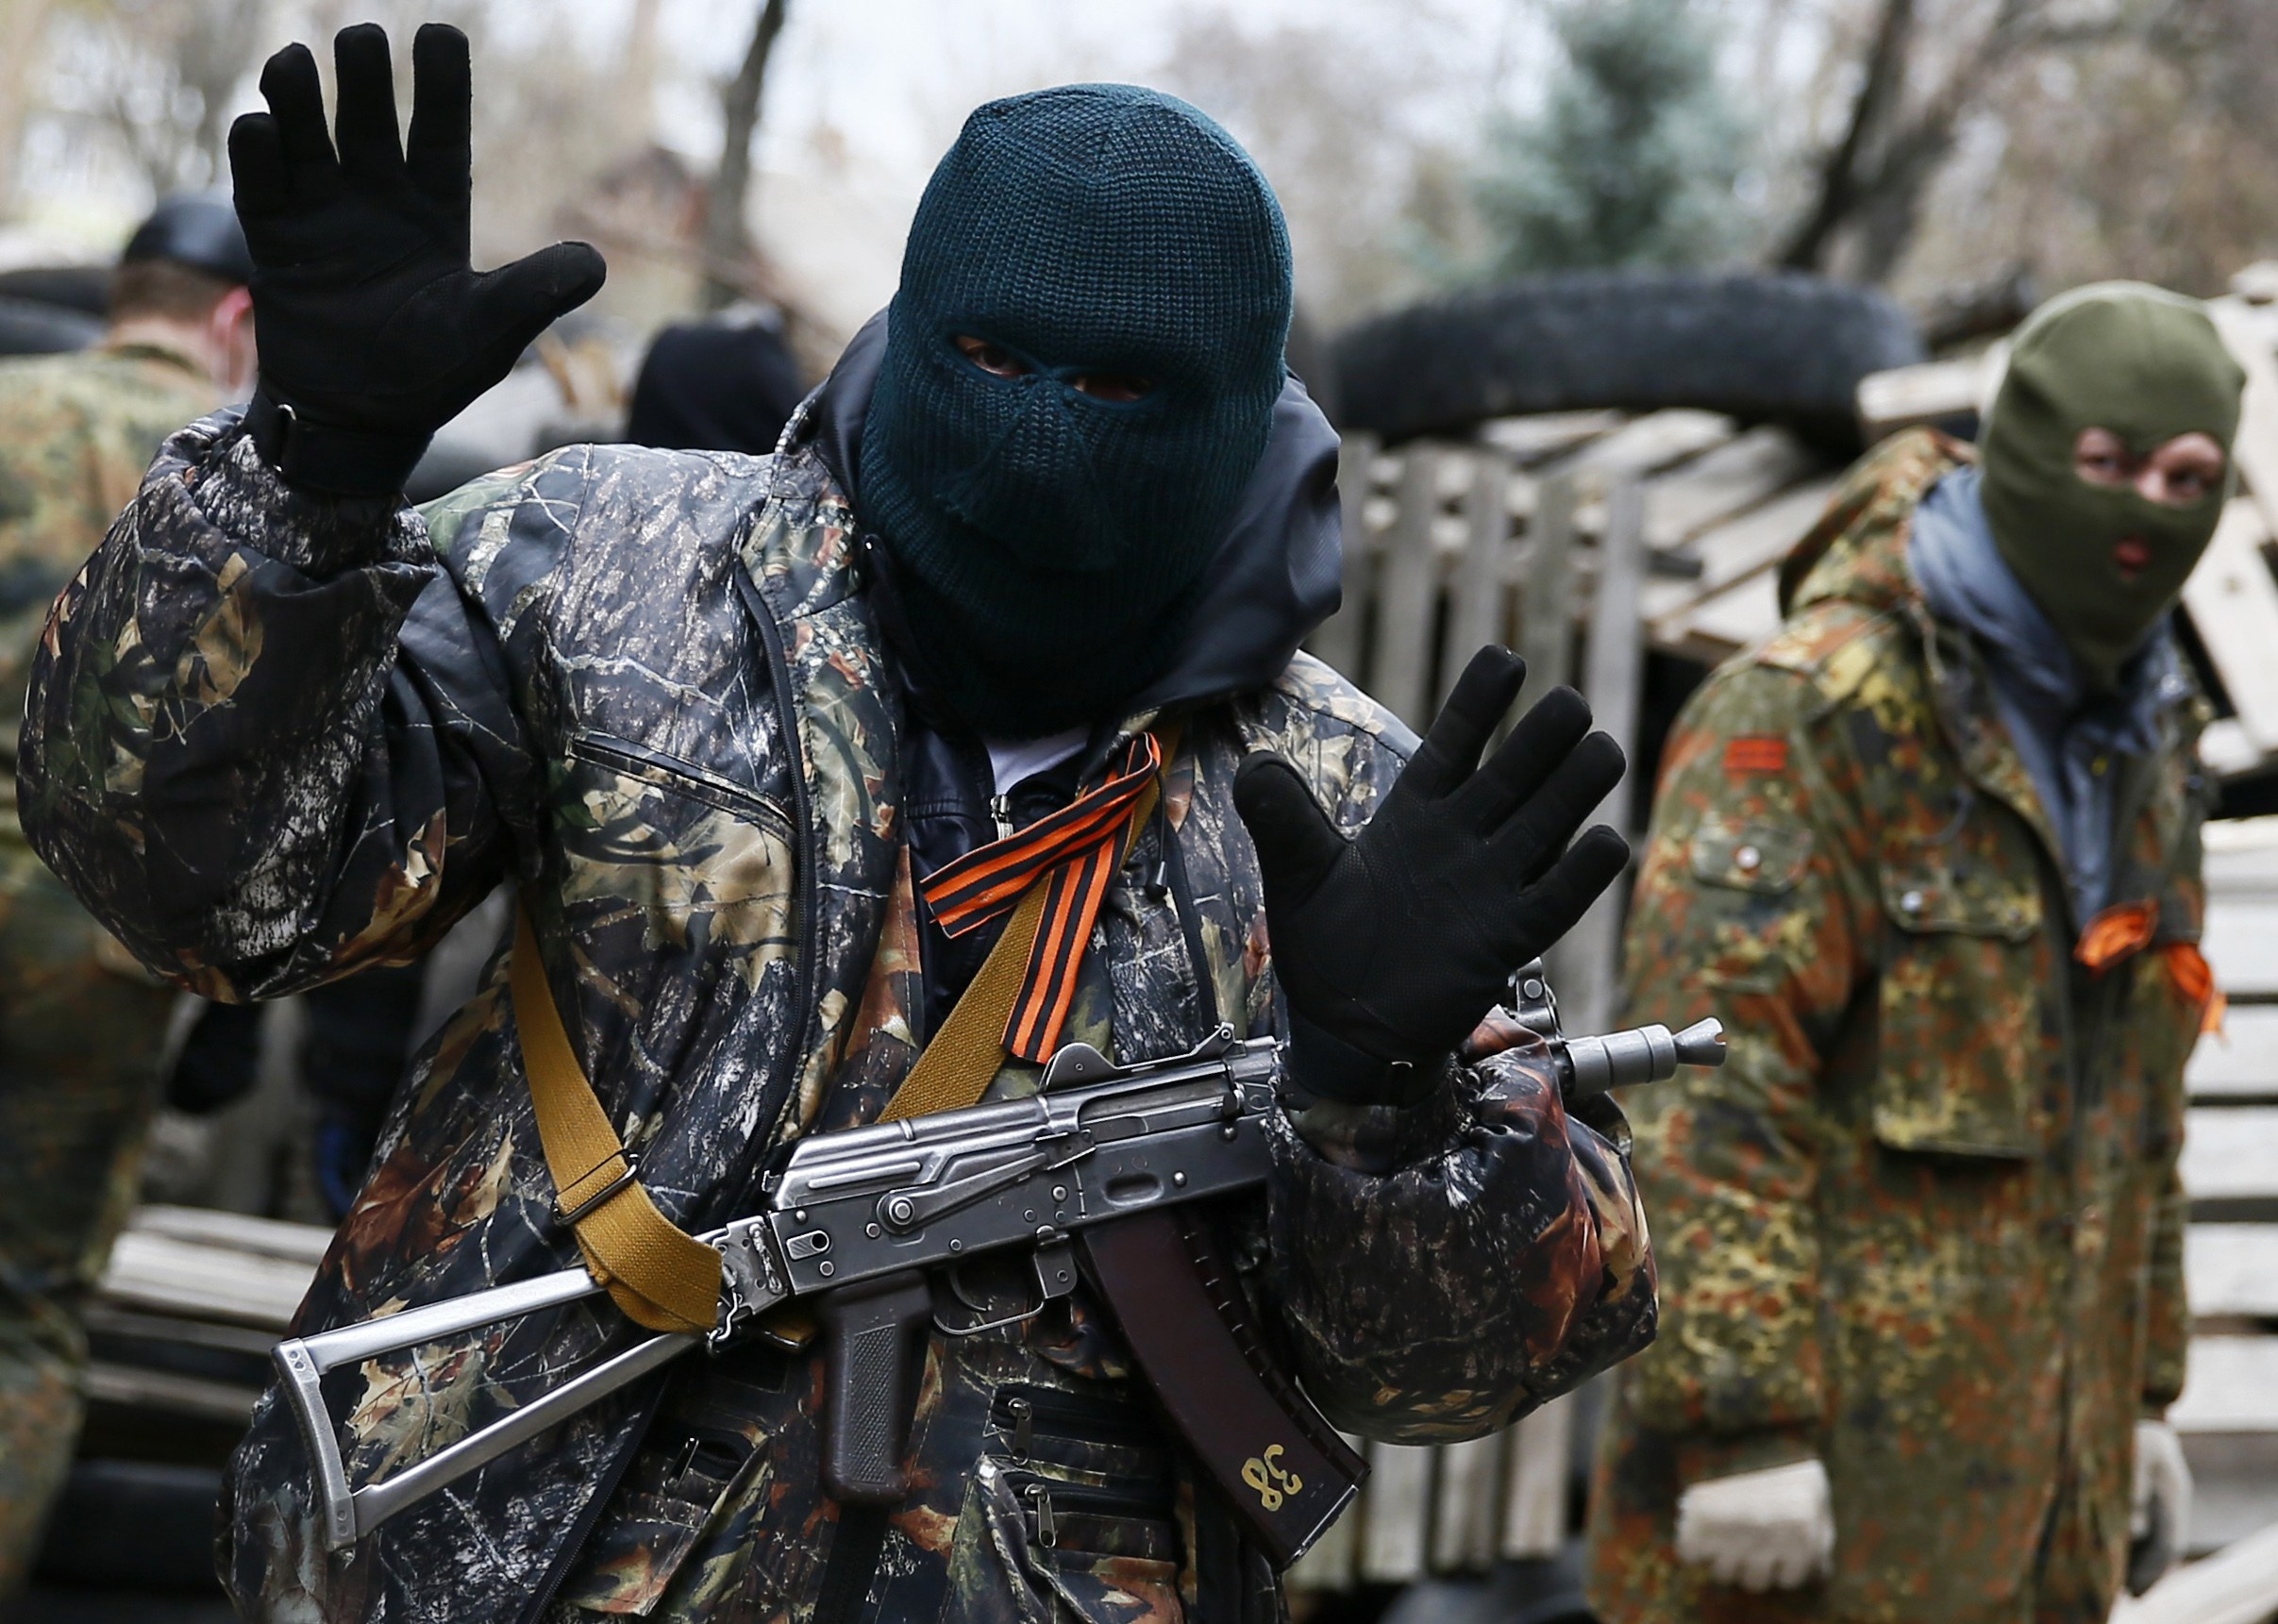 An armed man gestures in front of the police headquarters in Slaviansk, April 12, 2014. At least 20 armed militants wearing mismatched camouflage outfits took over the police and security services headquarters in the eastern city of Slaviansk seizing hund